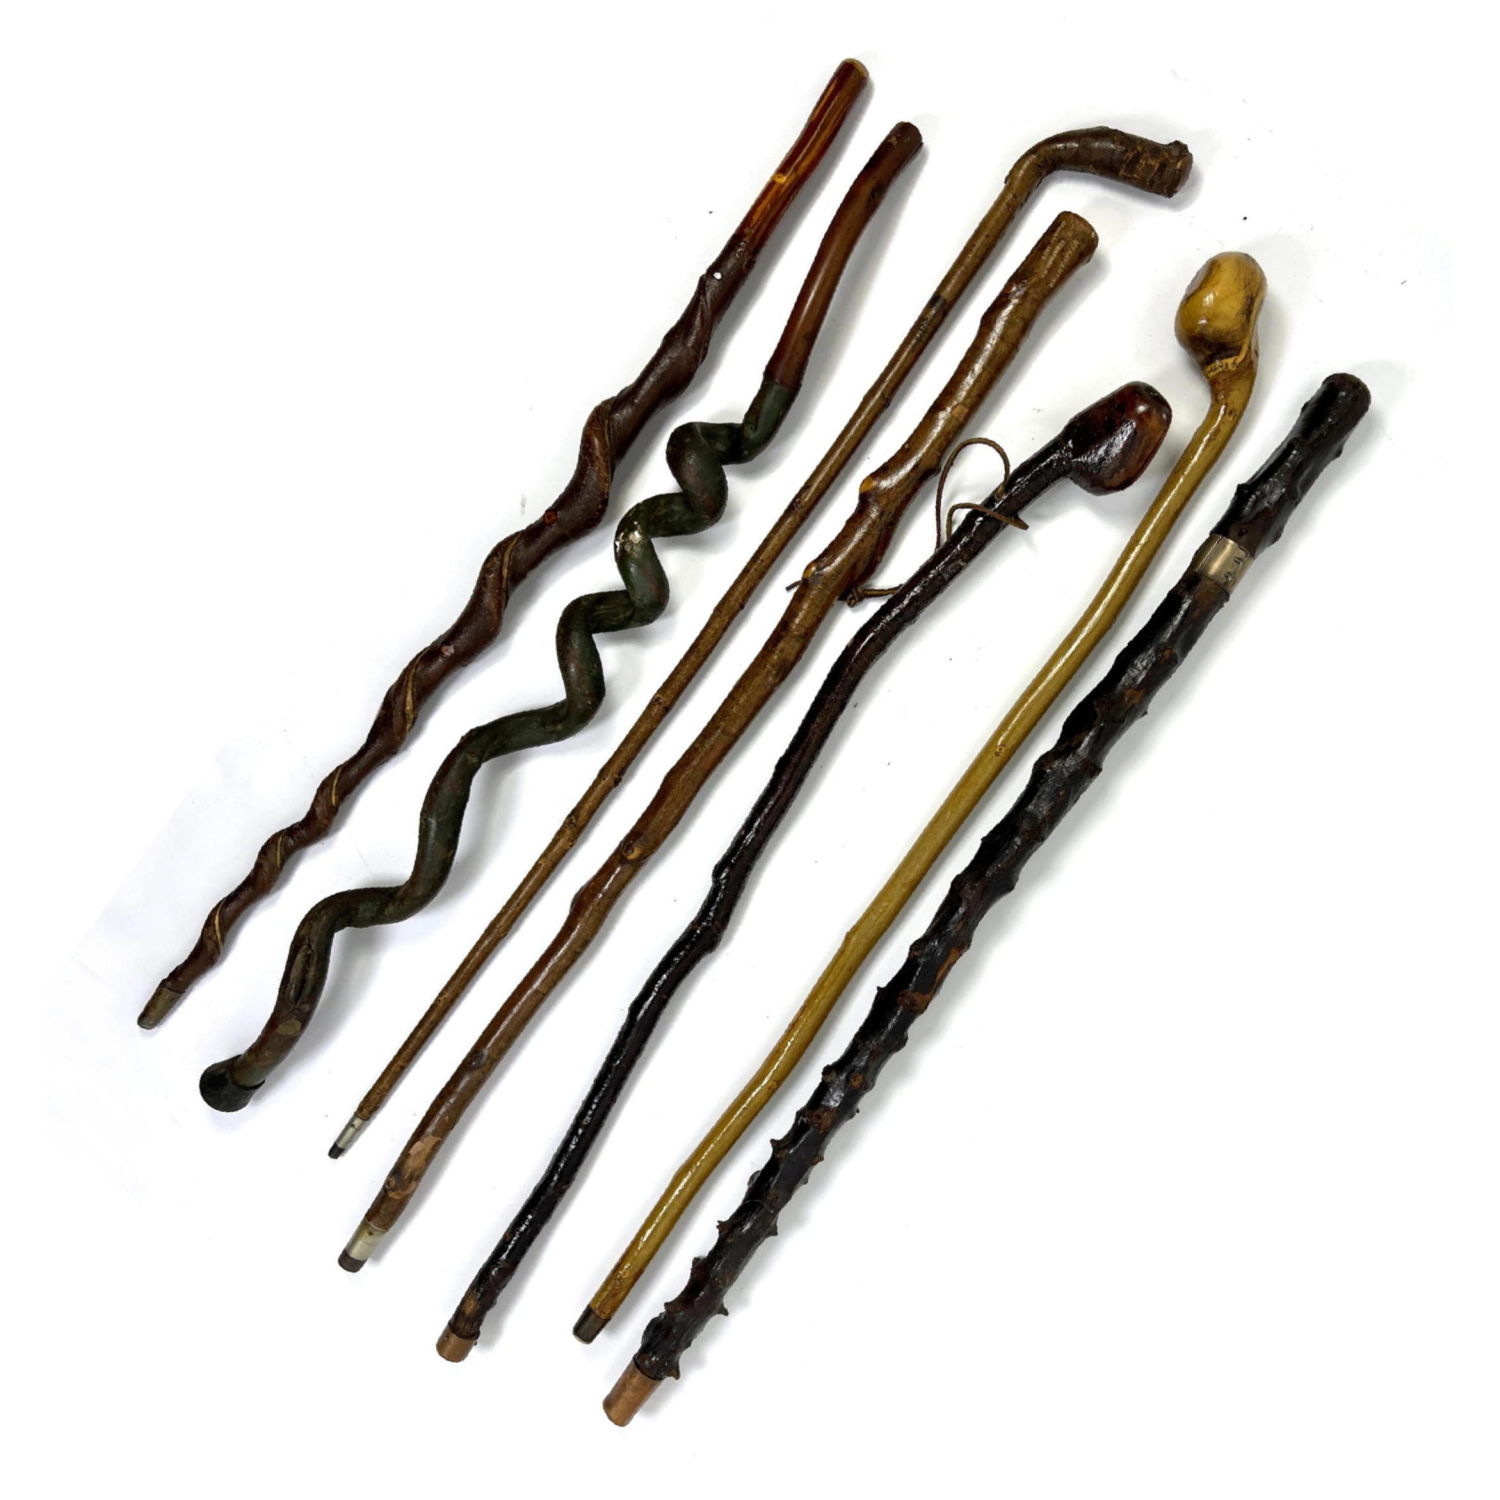 7pcs Vintage Canes and Walking